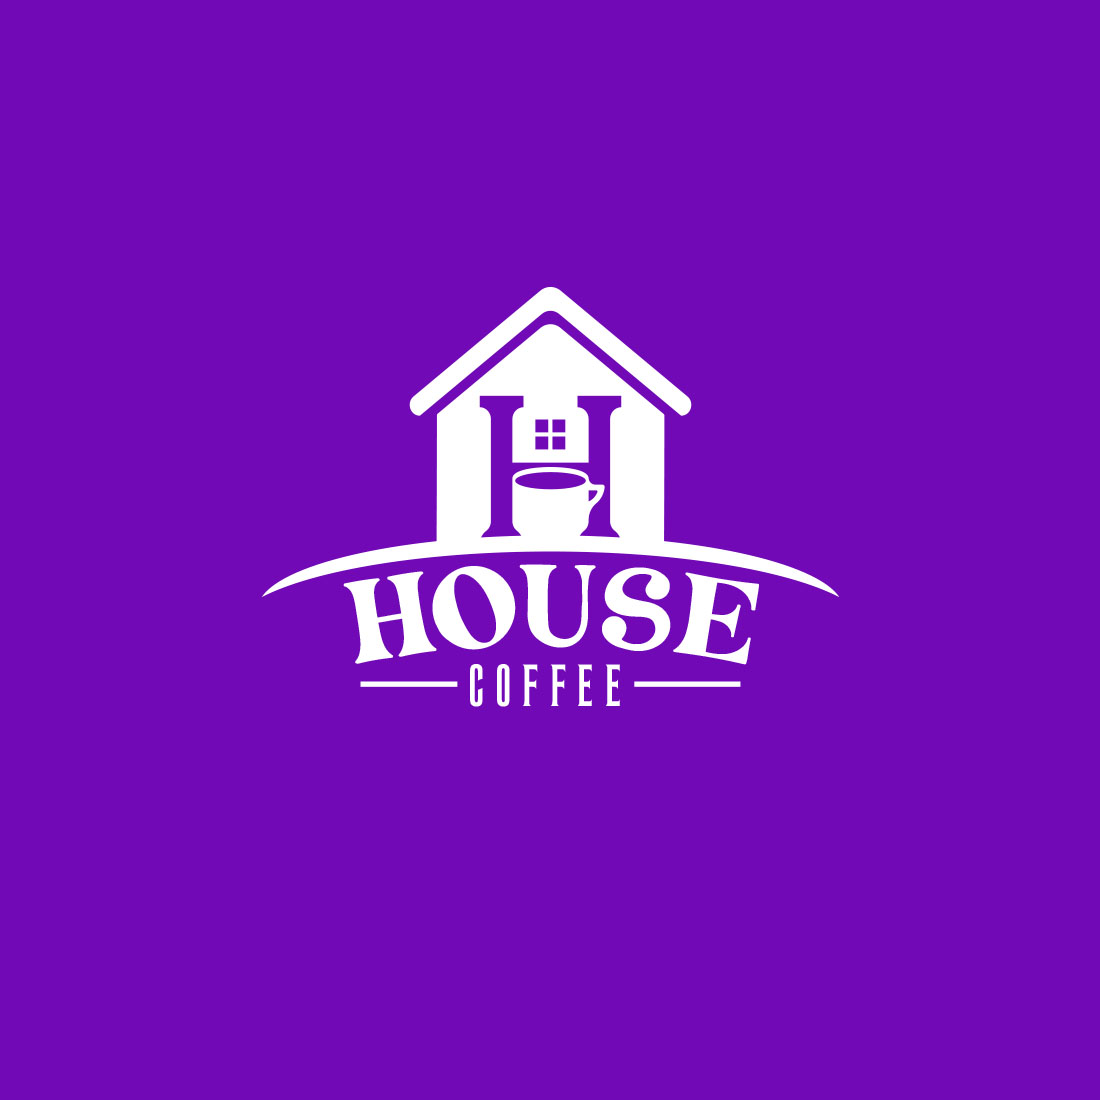 Perfect House Coffee Logo Design with violet background.